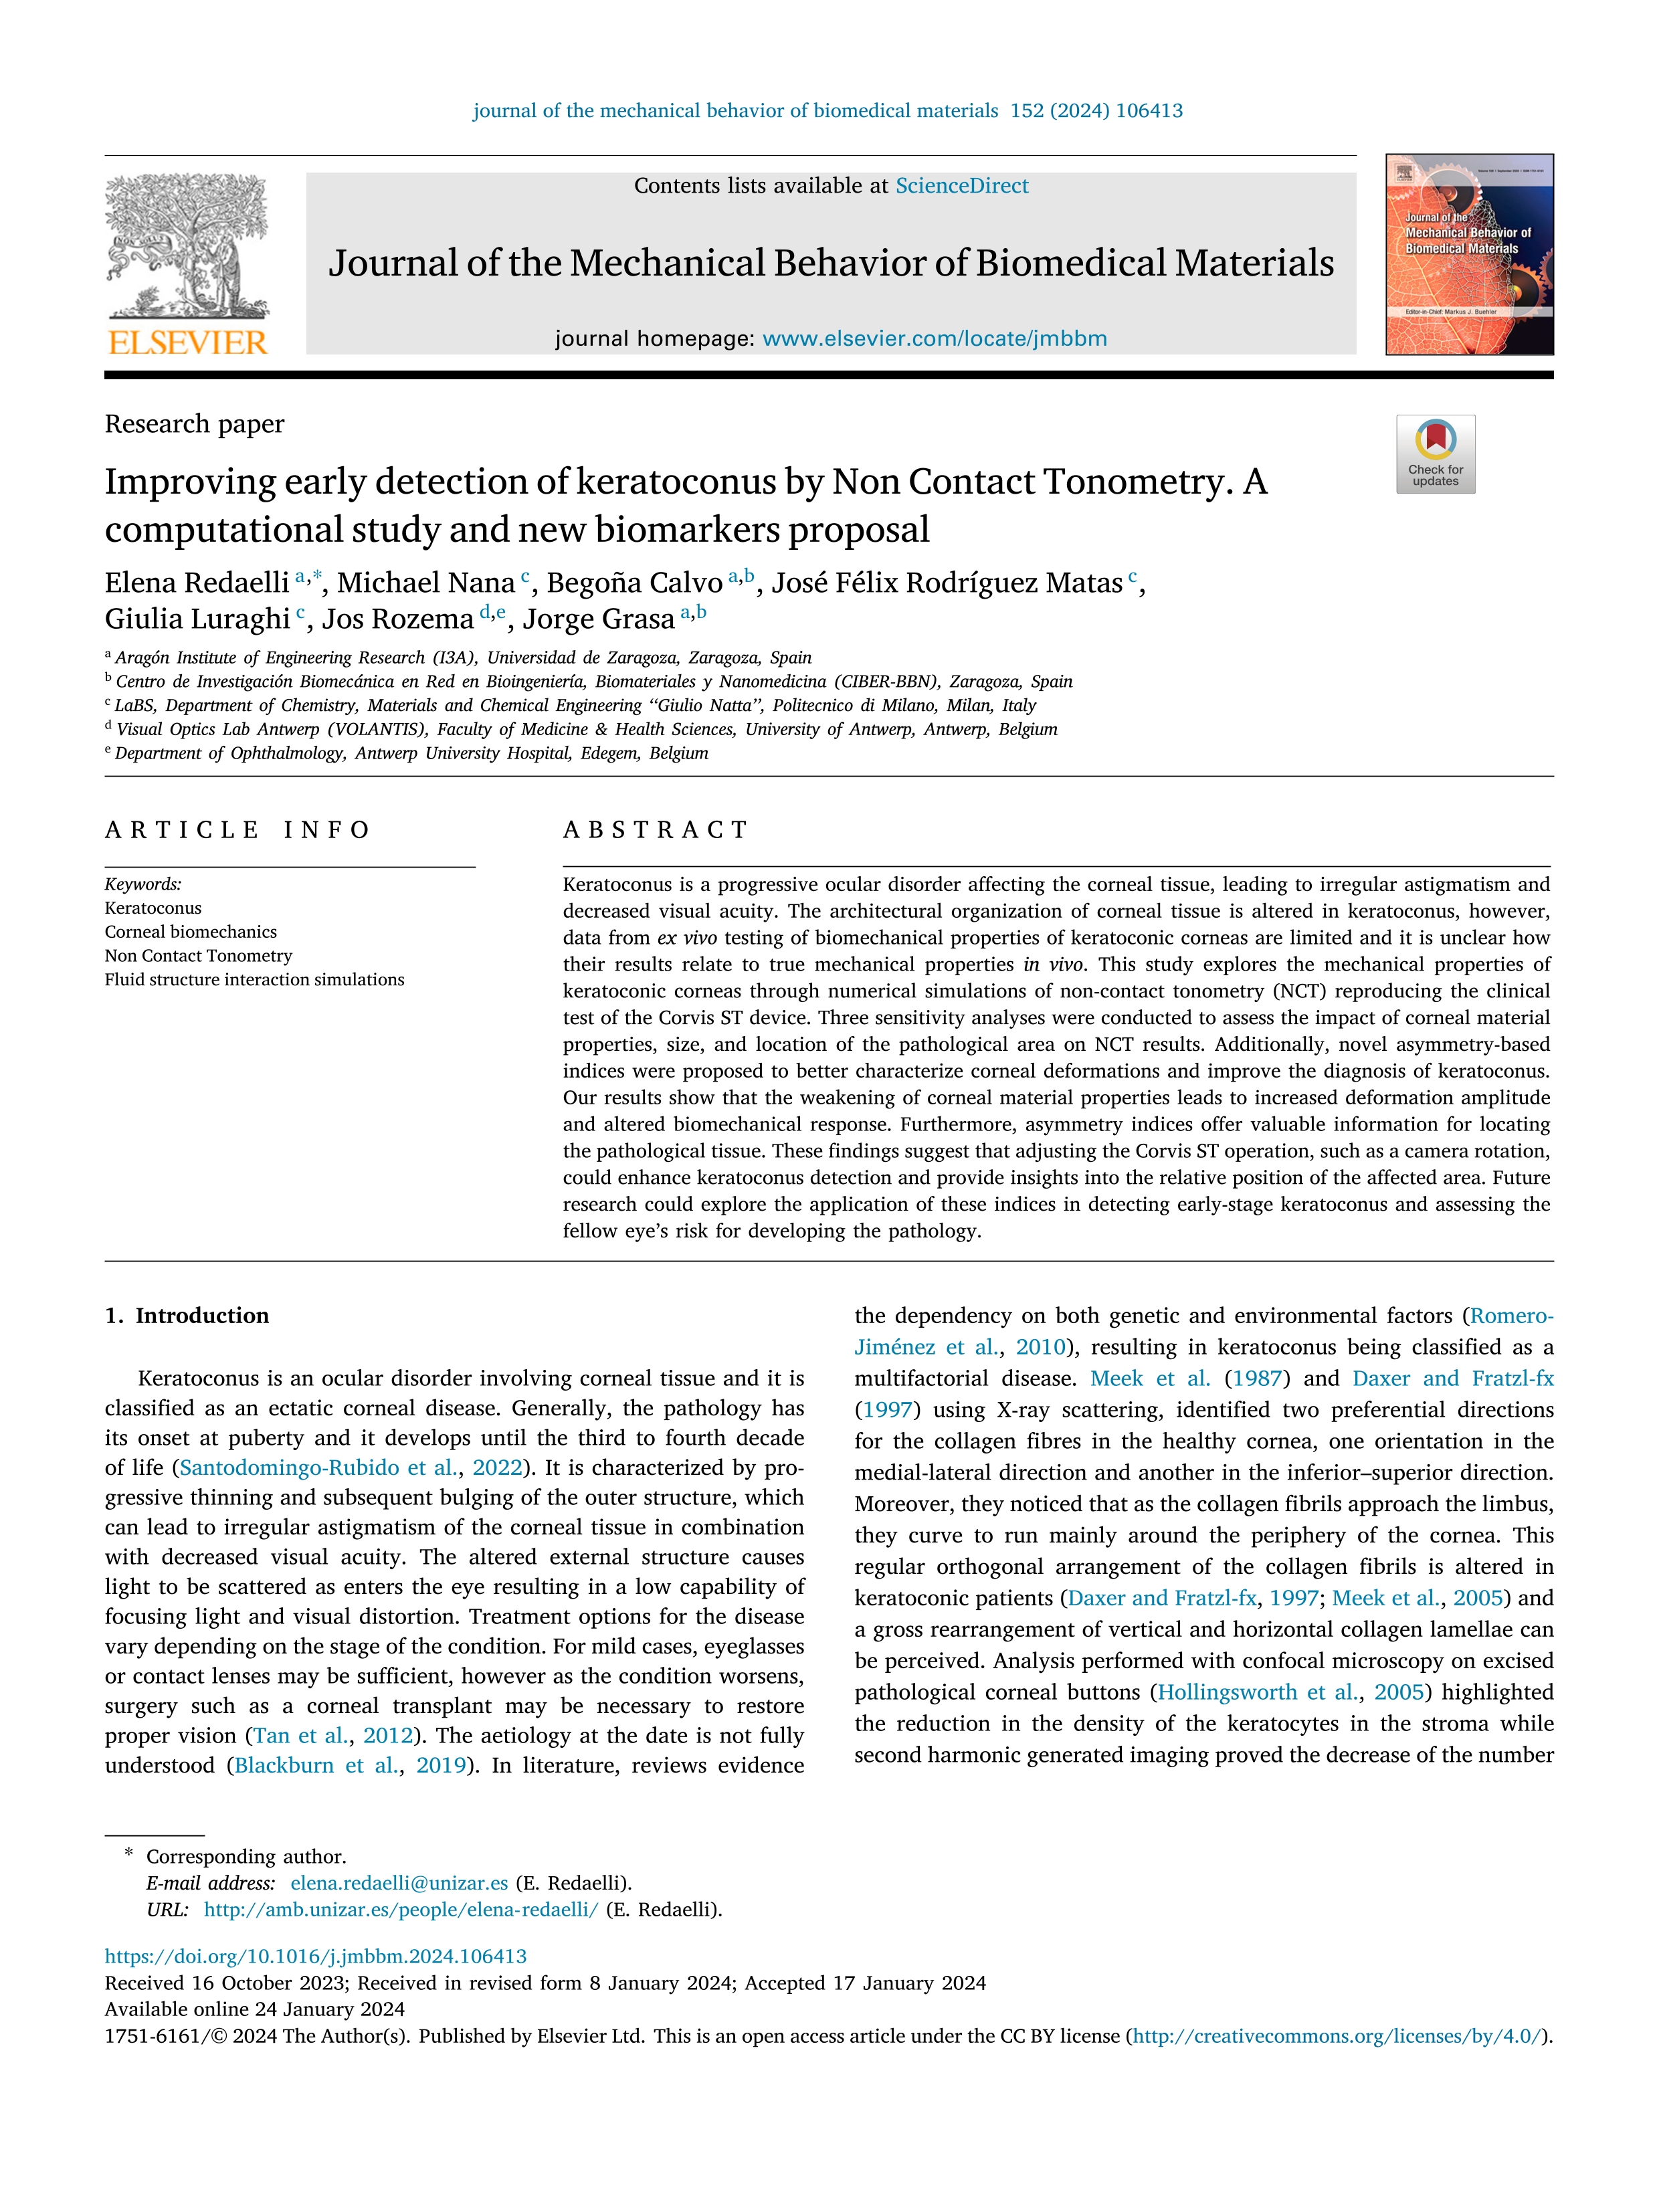 Improving early detection of keratoconus by Non Contact Tonometry. A computational study and new biomarkers proposal